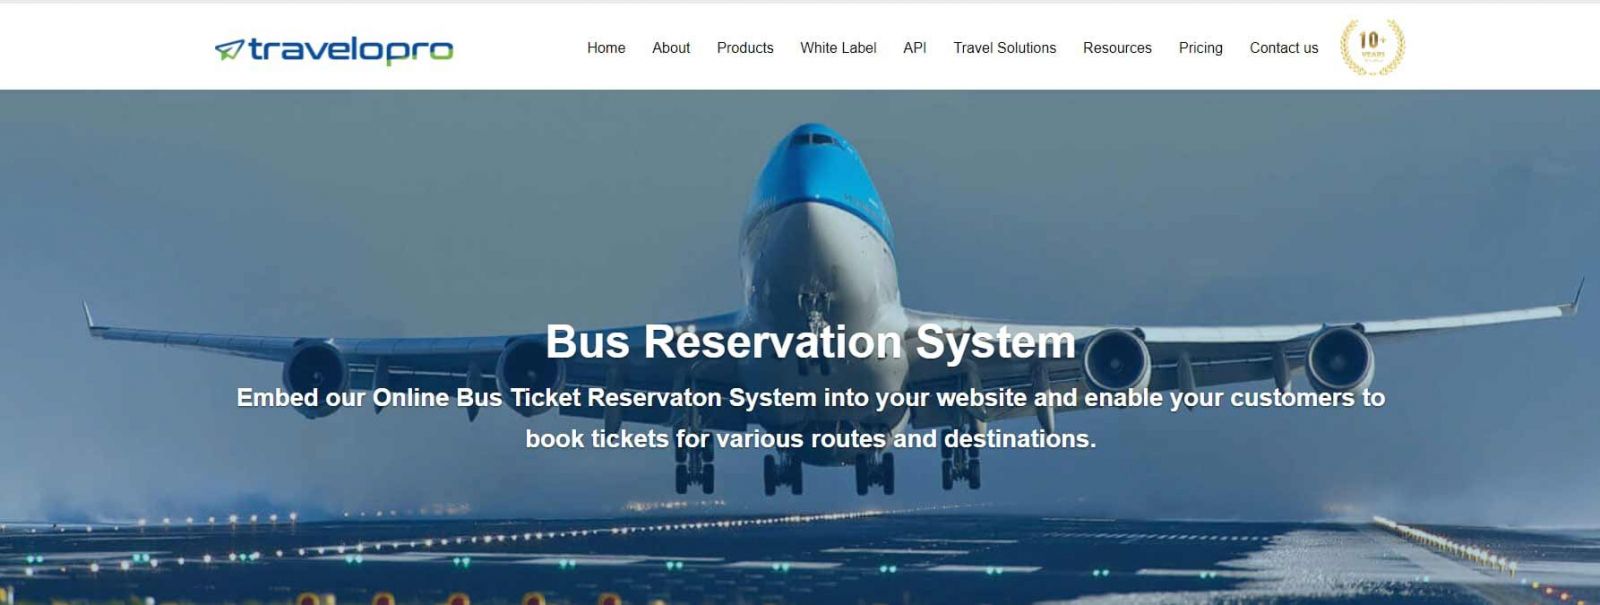 travelpro-bus-reservation-system